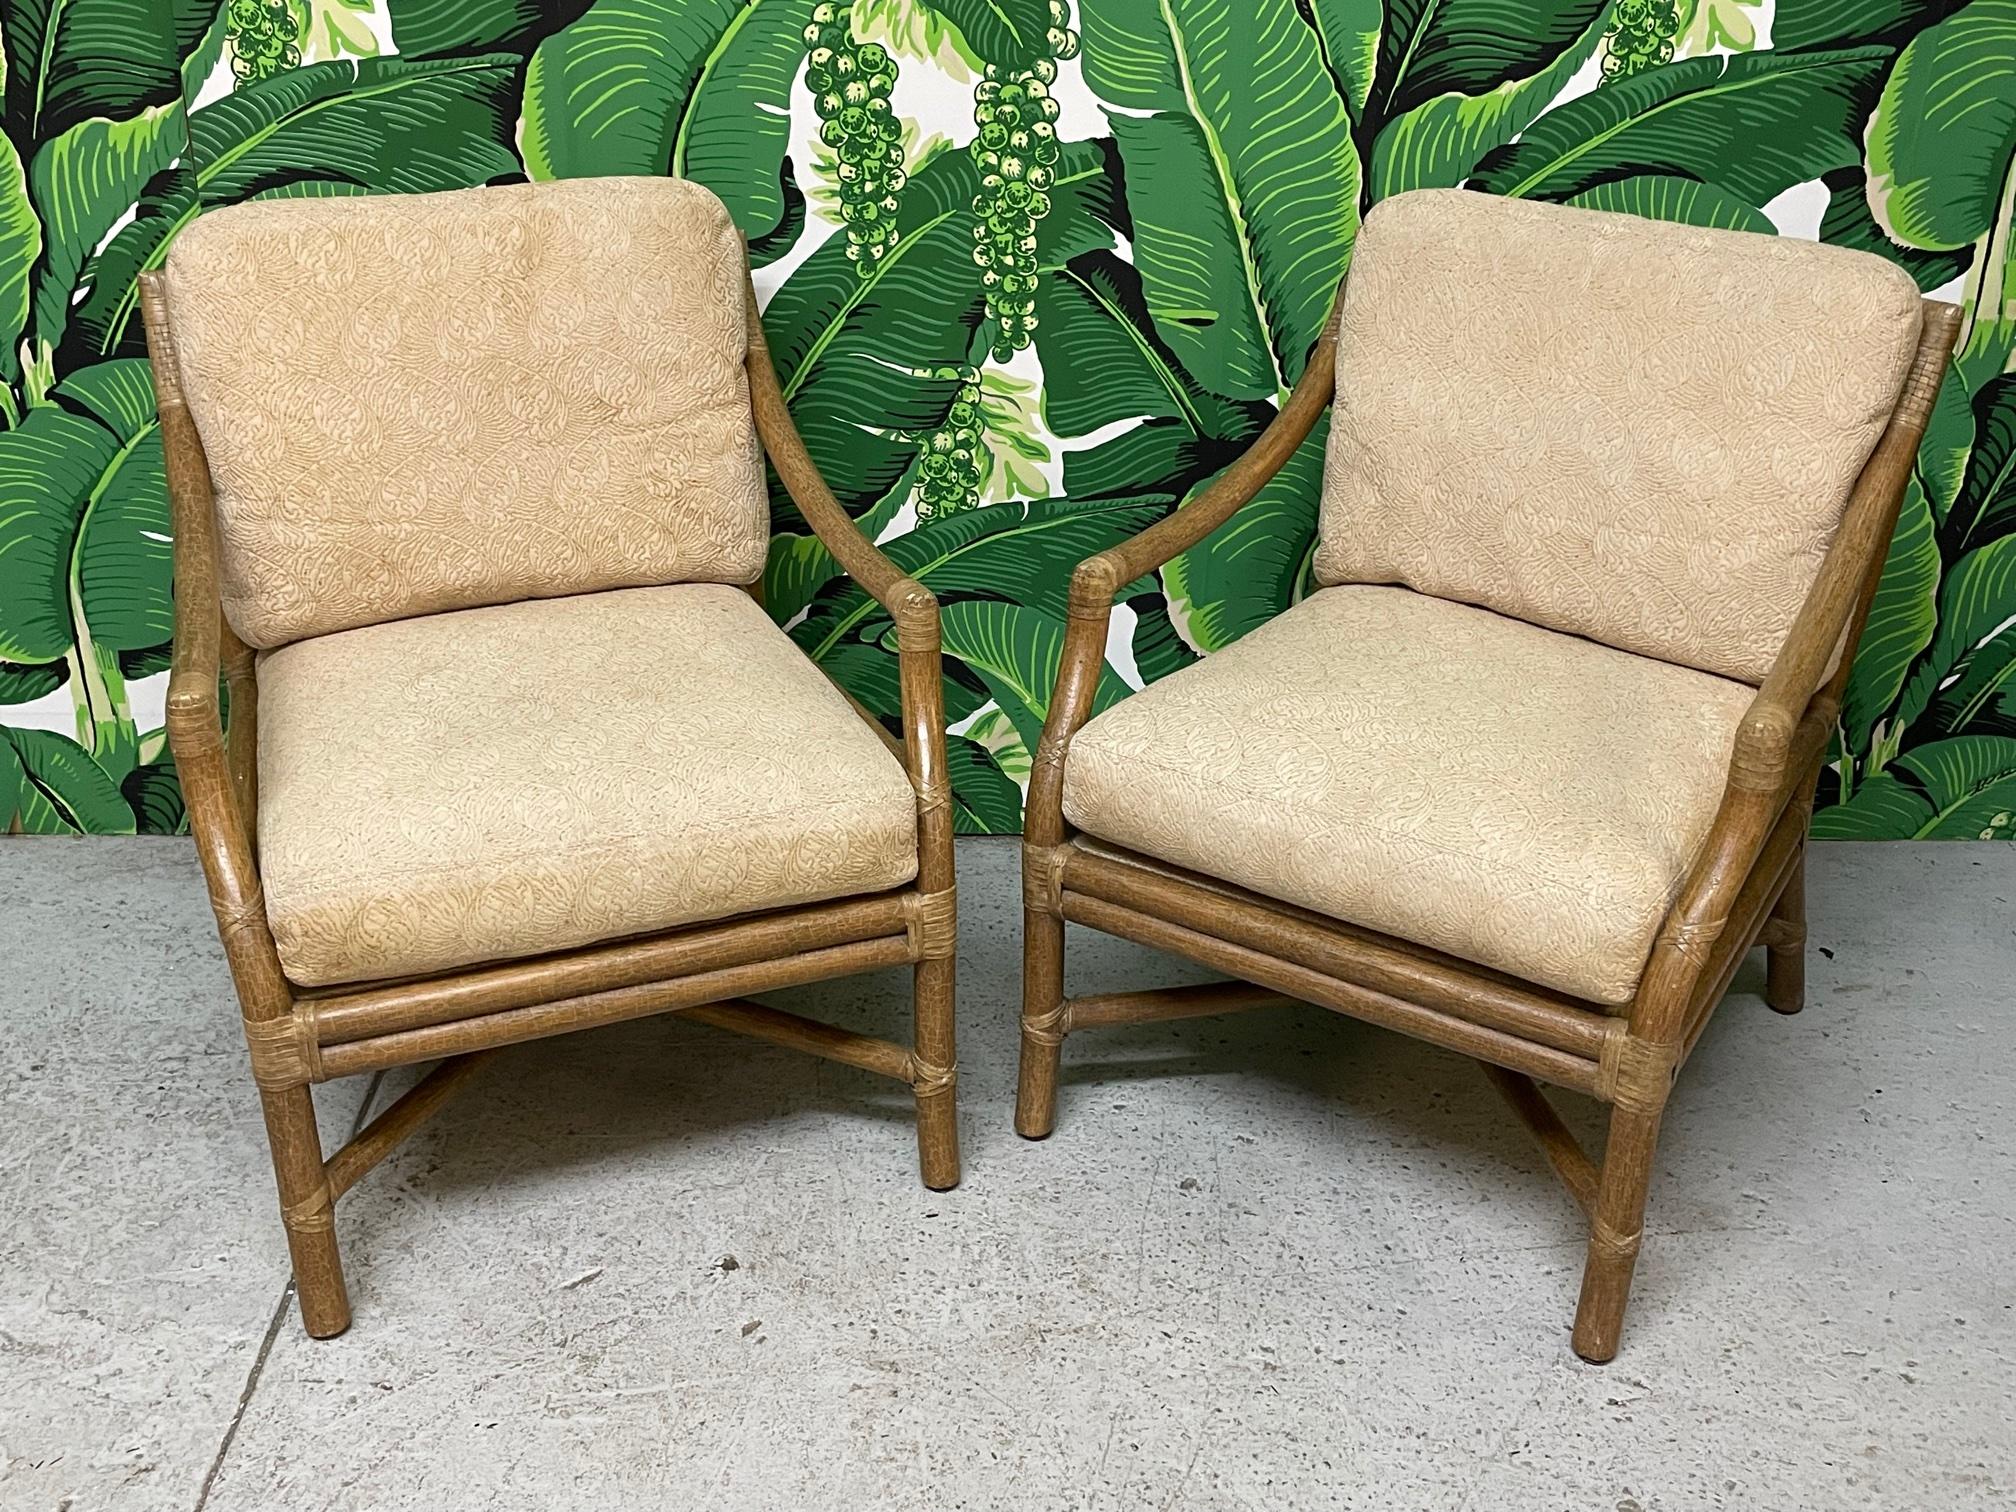 Pair of rattan arm chairs by McGuire feature the iconic target back design with an ebony ring to accent the center. Heavy rattan poles lashed with rawhide leather laces. A ?perfect patina to the finish and large comfortable cushions.Very solid